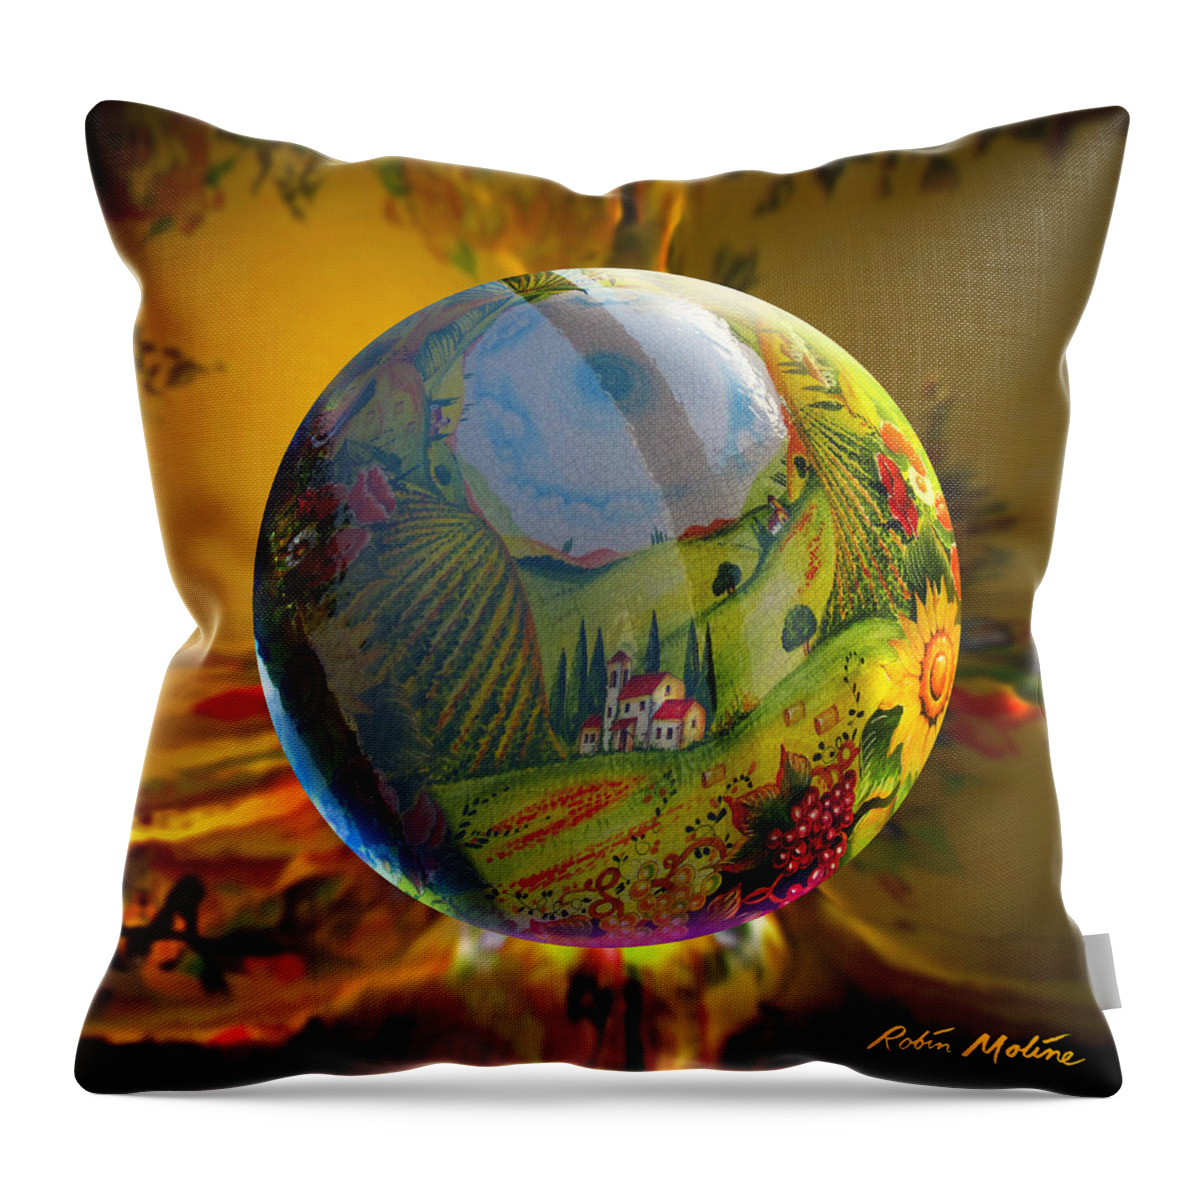 Tuscan Sun Throw Pillow featuring the painting Under a Tuscan Sun by Robin Moline